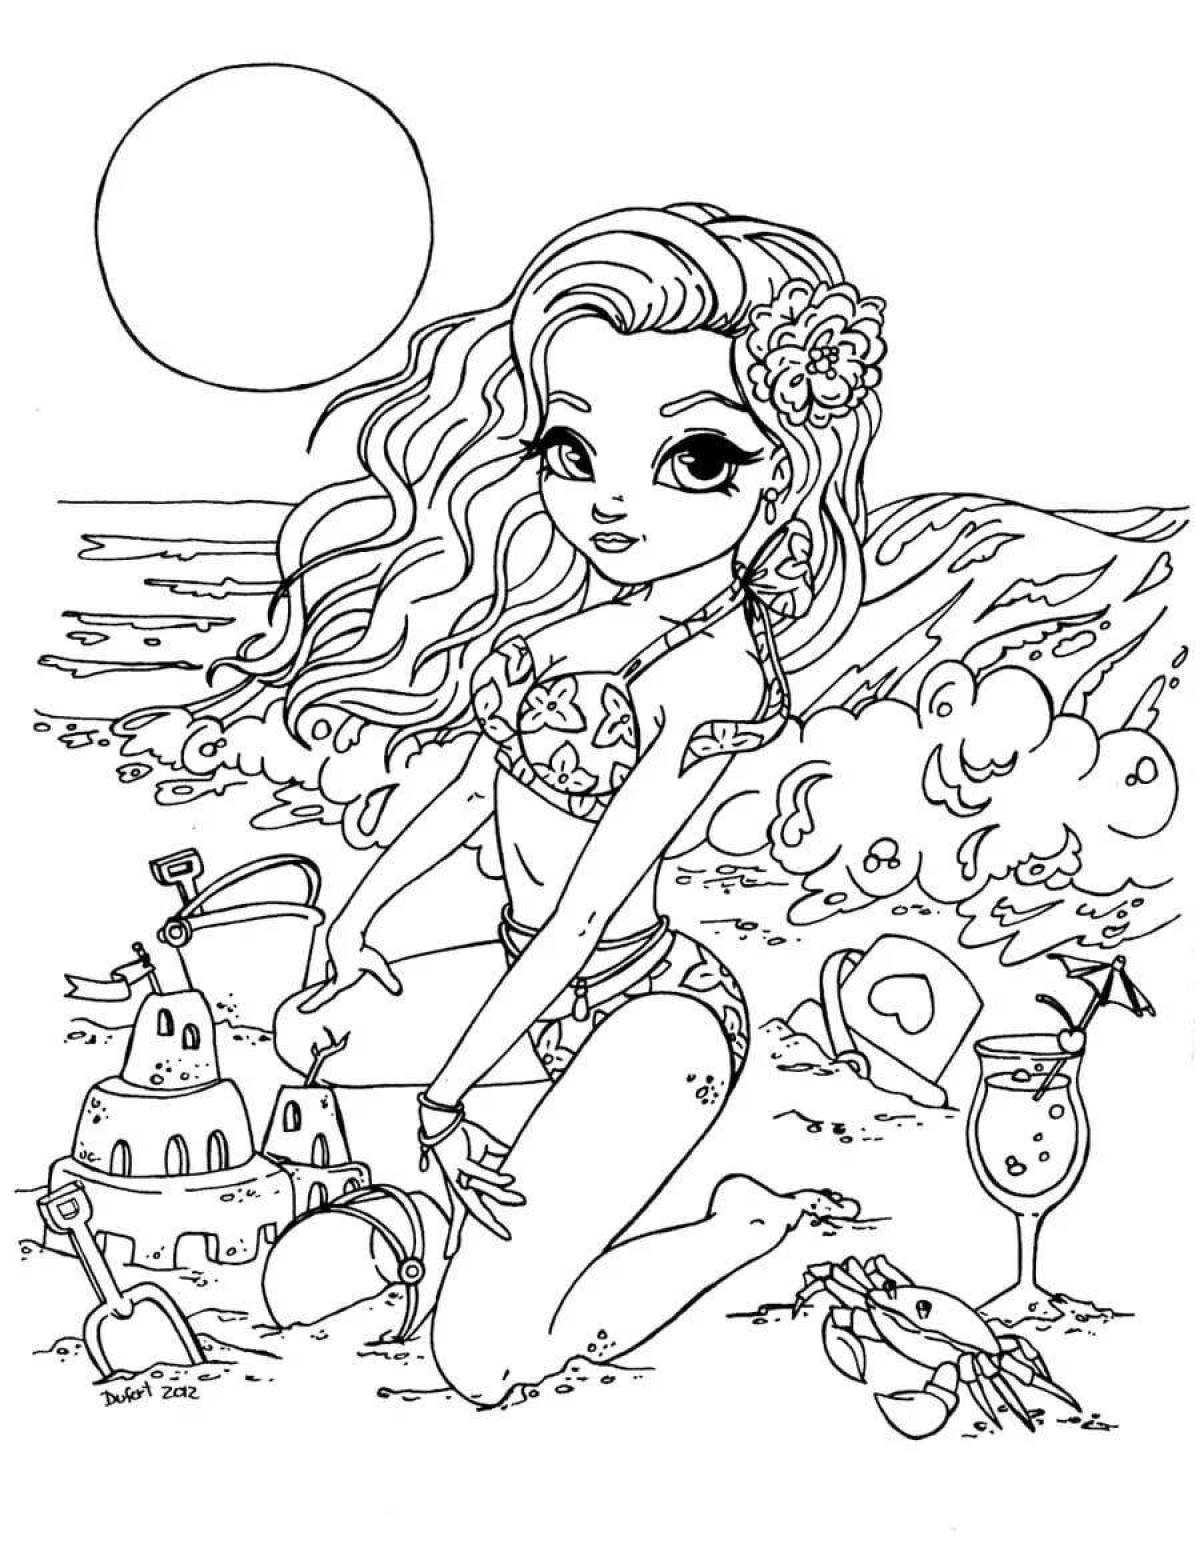 Color-frenzy coloring page for children 12-13 years old